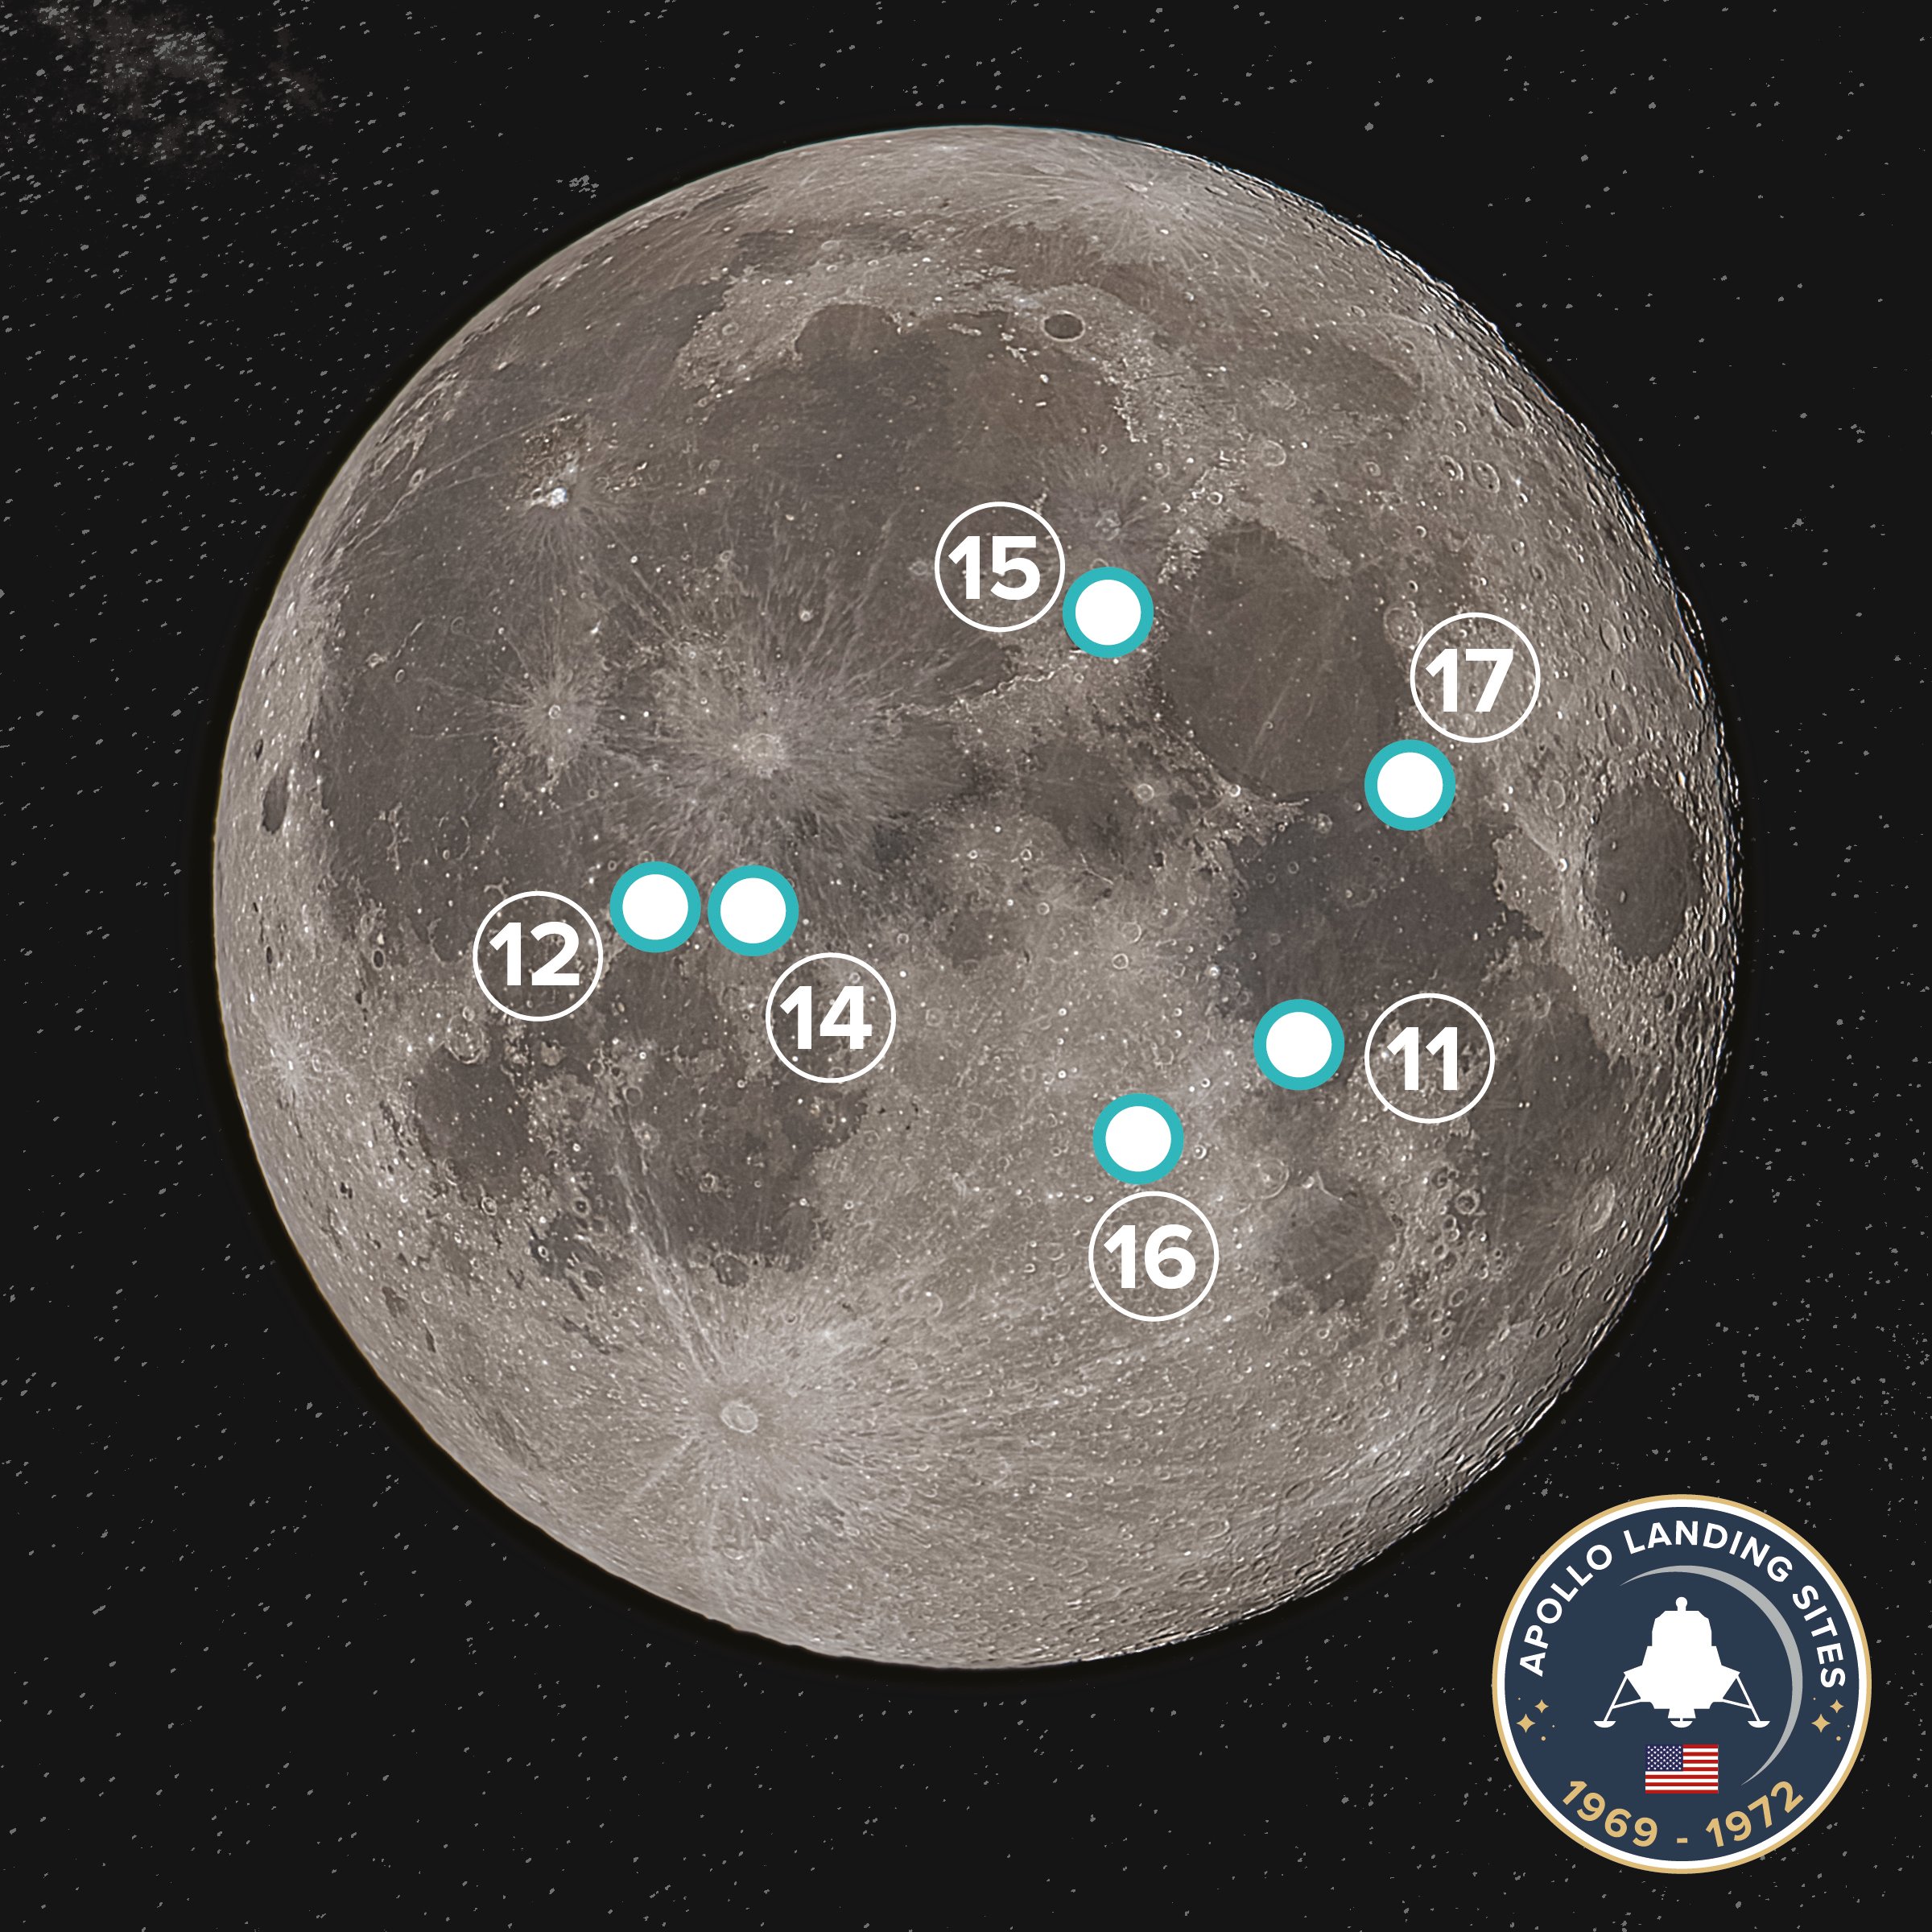 A photo of the Moon with the six Apollo mission lunar landing sites indicated.